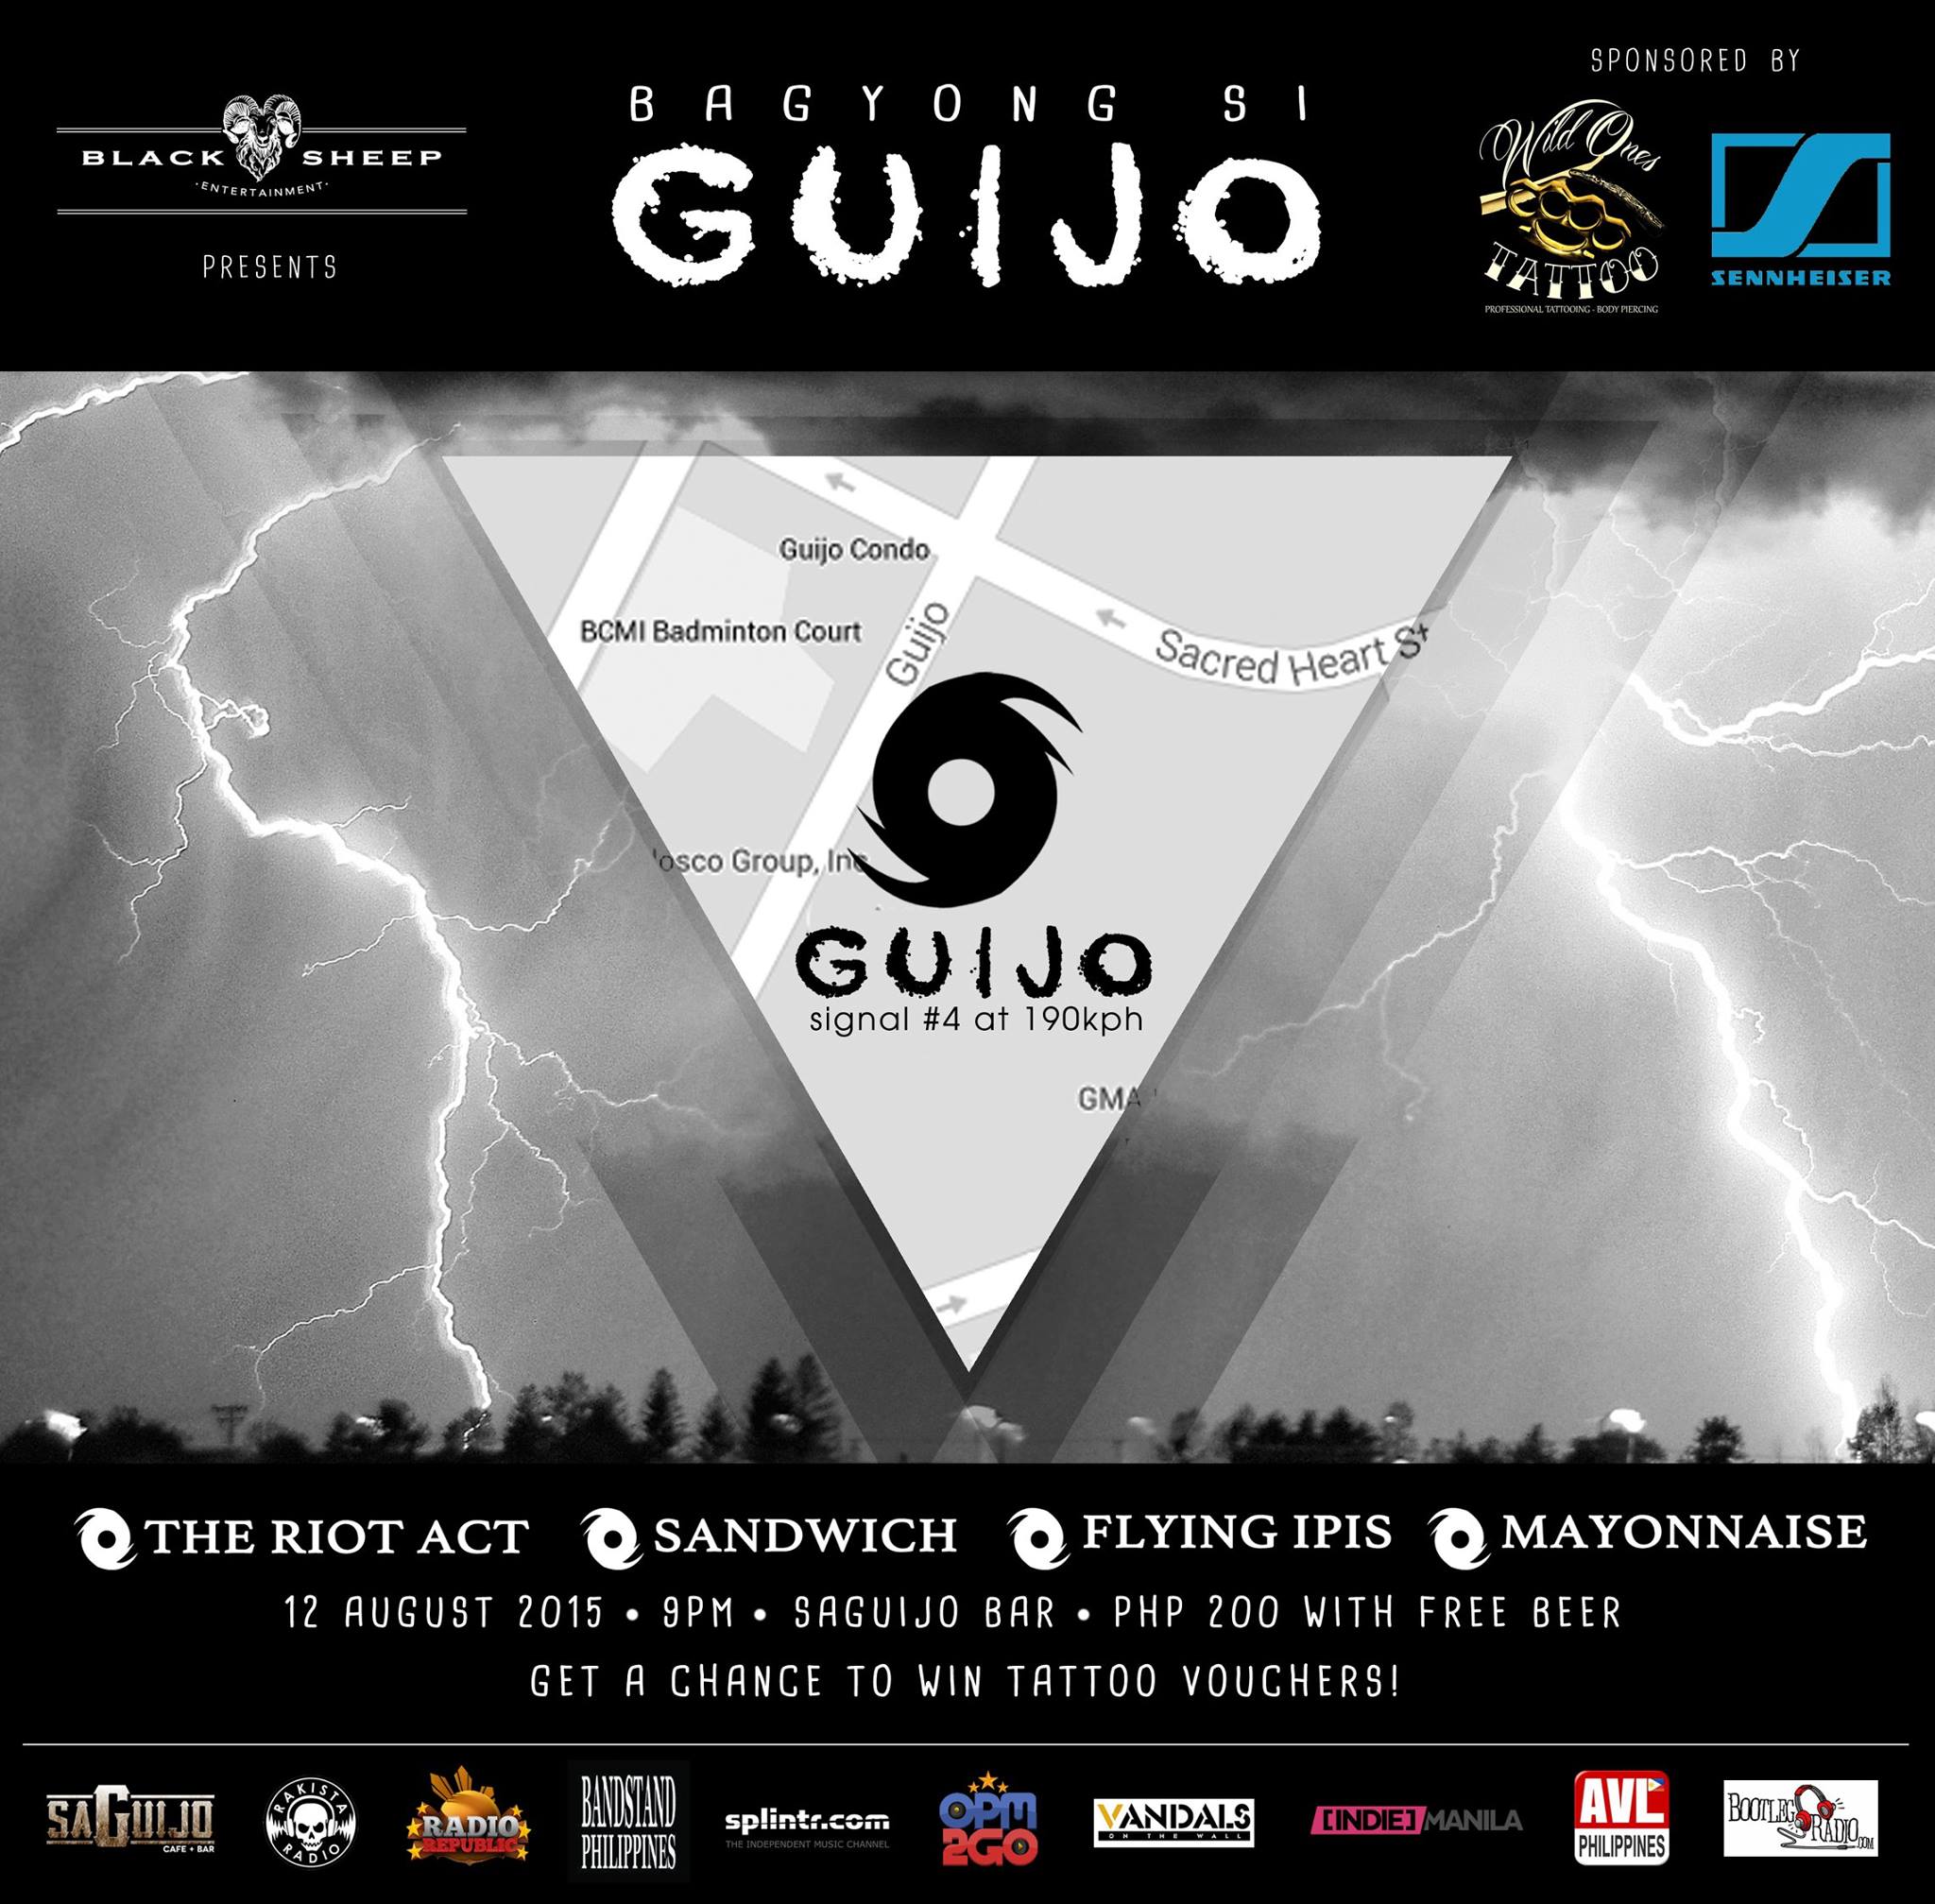 BAGYONG SI GUIJO     Wednesday, August 12     at 9:00pm - 1:00am     Aug 12 at 9:00pm to Aug 13 at 1:00am     	     Show Map     saGuijo Cafe + Bar Events     7612 Guijo Street, San Antonio Village, 1203 Makati     	     Invited by Christiana June Mongaya Ang pinakamalakas na bagyo ngayong Agosto: BAGYONG SI GUIJO 9PM, 12 AUGUST 2015 Saguijo Bar, Makati Presented by Black Sheep Entertainment With performances by The Riot Act Sandwich Flying Ipis Mayonnaise Sponsored by Wild Ones Tattoo* Sennheiser Philippines Supported by Rakista Radio Radio Republic Bandstand Philippines OPM2Go Bootleg Radio AVL Philippines Vandals on the Wall Indie Manila Splintr *Get a chance to win tattoo vouchers! @[null:@[null:#BagyongSiGuijo]] -- Black Sheep Entertainment July 23 ·   Parating na ang pinakamalakas na bagyo ngayong Agosto! BAGYONG SI GUIJO 9PM, 12 August 2015 saGuijo Cafe + Bar Events with performances by The Riot Act andwich Flying Ipis Mayonnaise #BagyongSiGuijo ----- Christiana June Mongaya shared Black Sheep Entertainment's photo. 8 mins Sharing a poster I did for Black Sheep Entertainment smile emoticon If interested din kayo sa music and bands, tara!